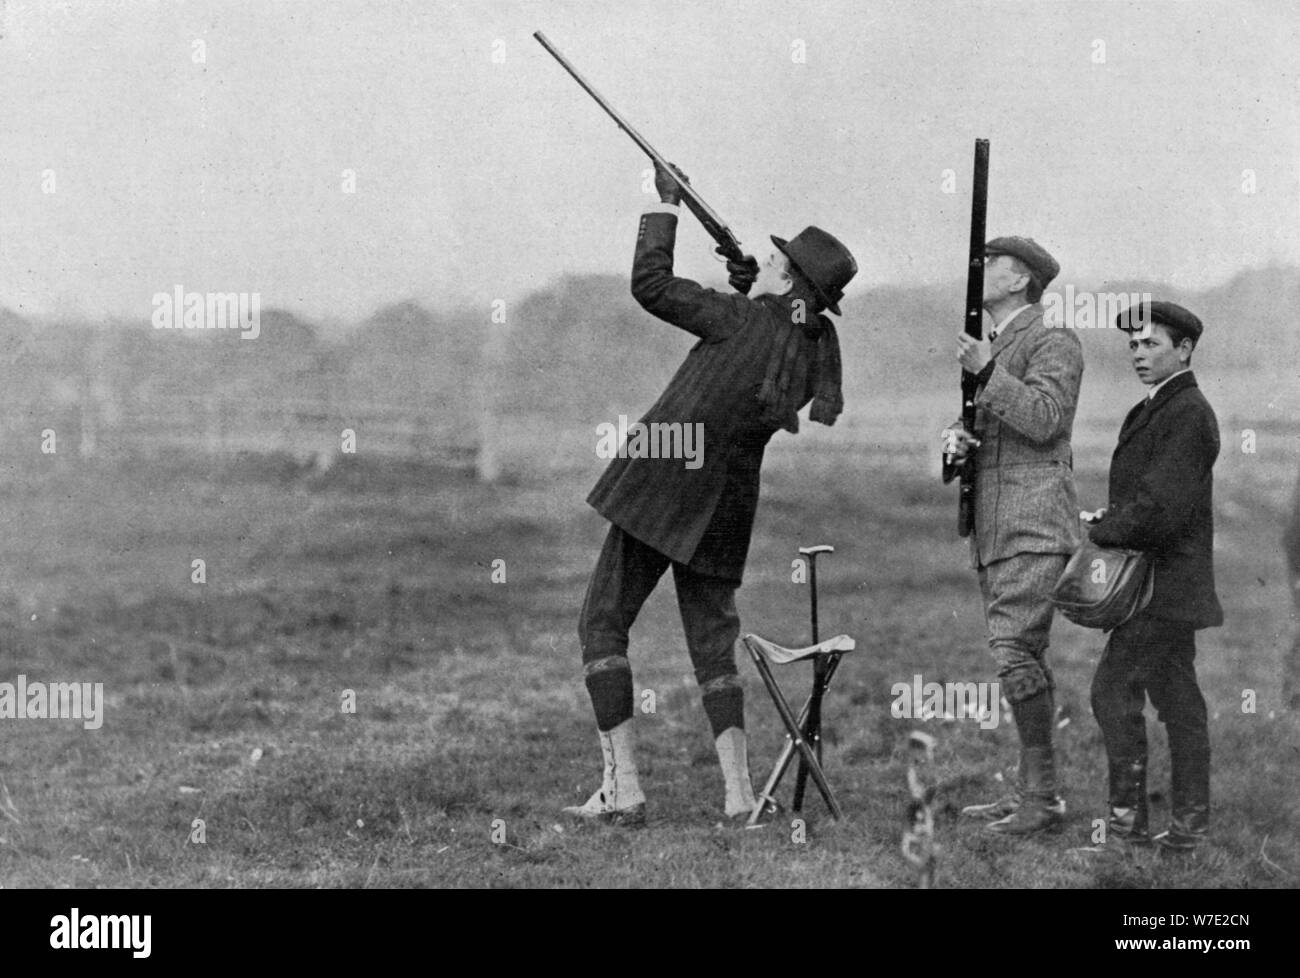 King Manuel II of Portugal shooting at Windsor, Berkshire, 1909. Artist: Unknown Stock Photo